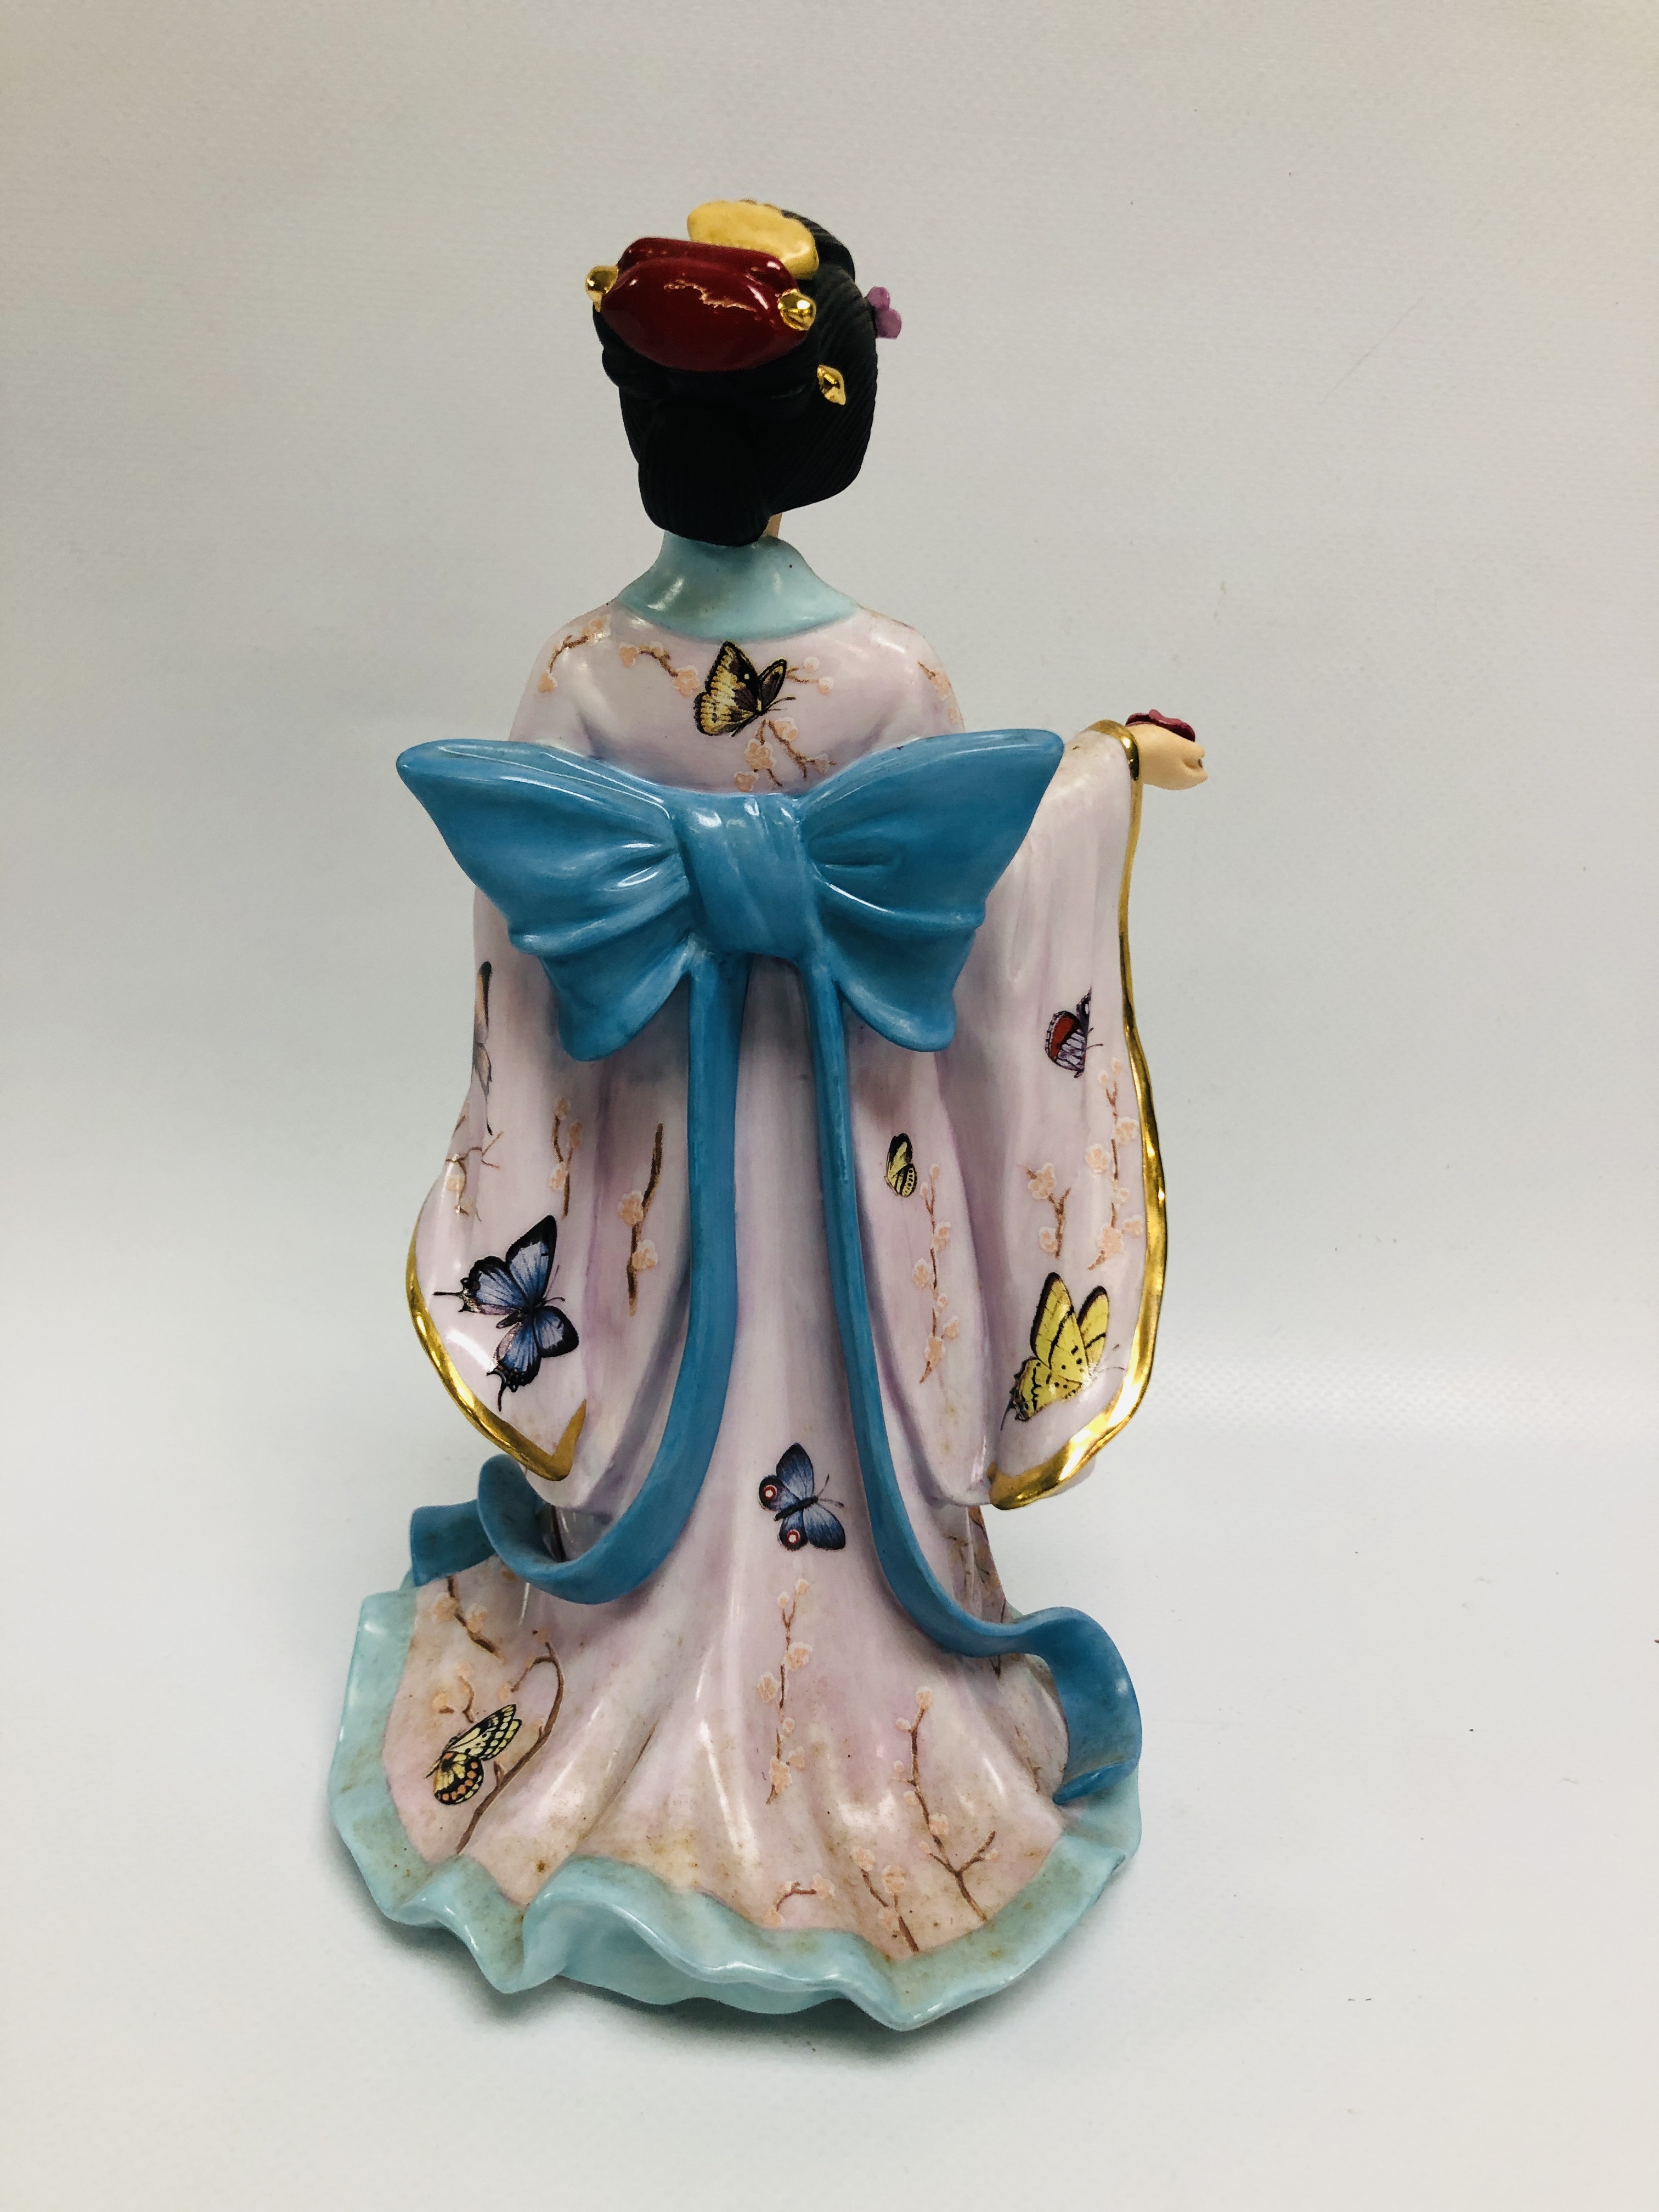 4 X DANBURY MINT COLLECTOR'S FIGURES TO INCLUDE 3 FROM THE LENA LIU COLLECTION (ROSE PRINCESS, - Image 10 of 12